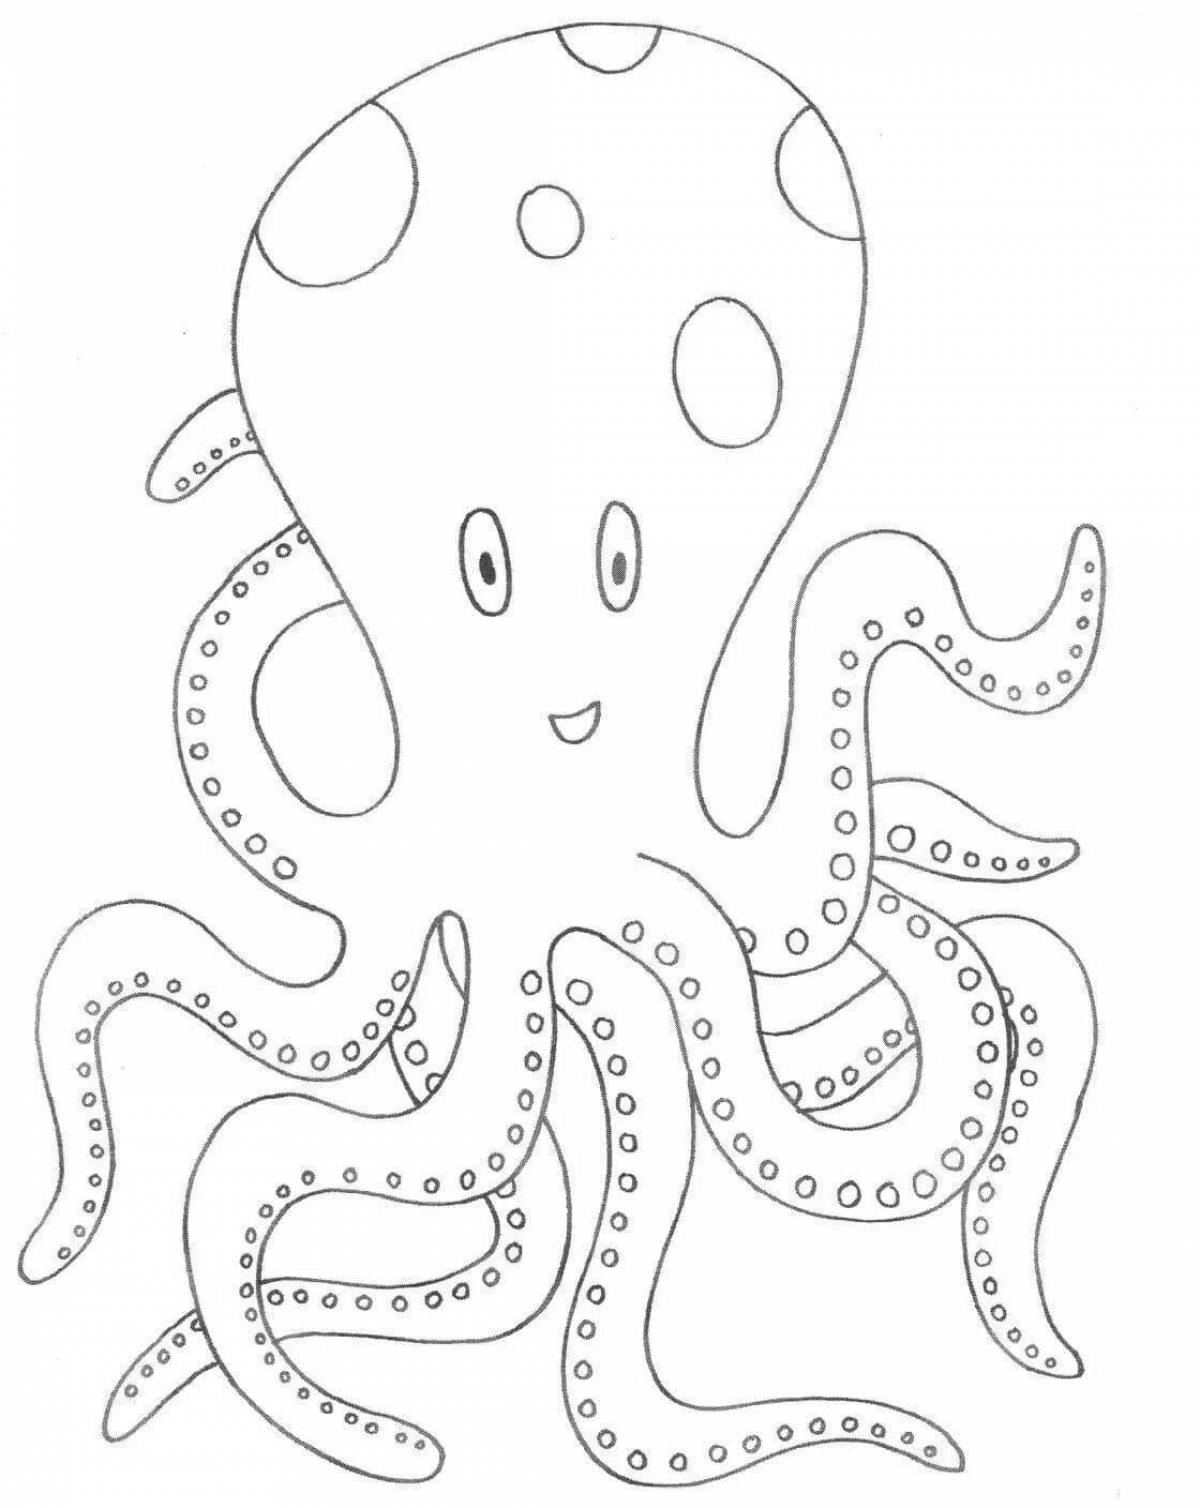 Colorful octopus coloring book